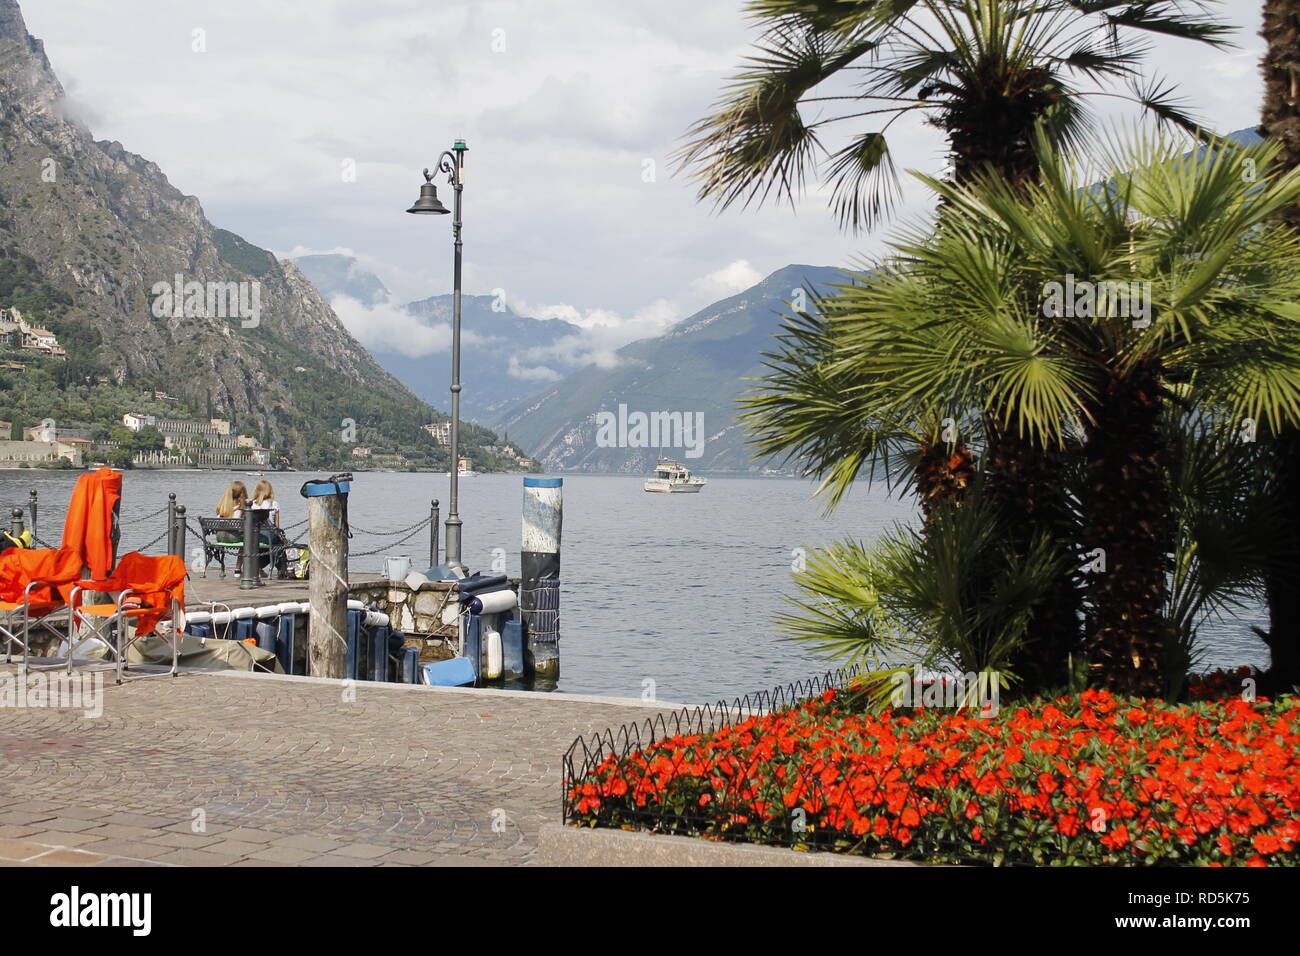 Walkway with colorful flowers on Garda lake in Italy. Stock Photo